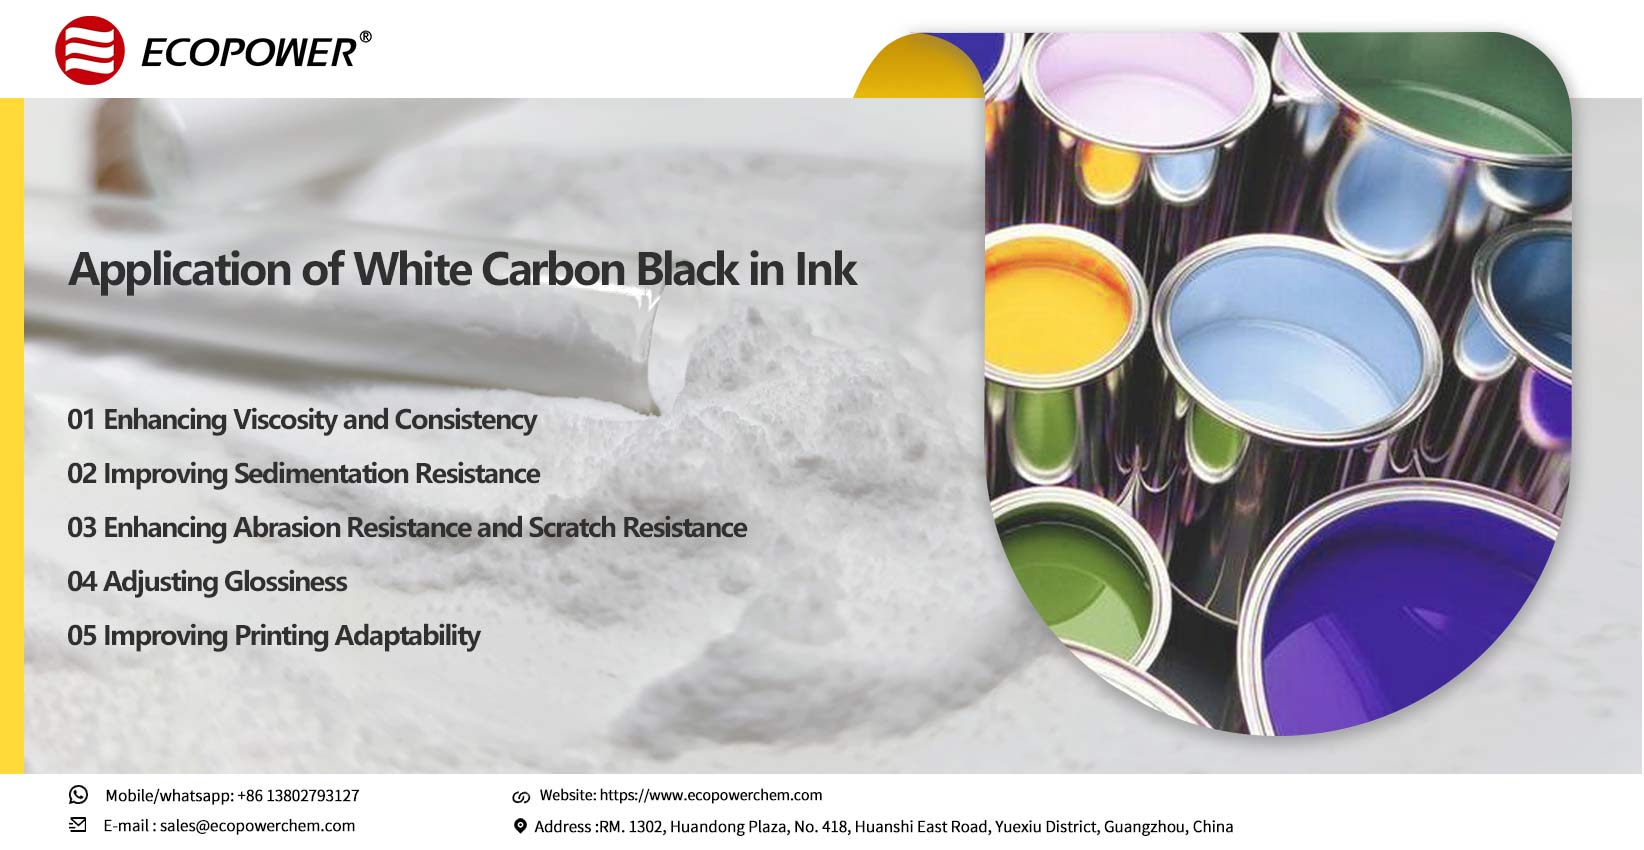 Application of White Carbon Black in Ink